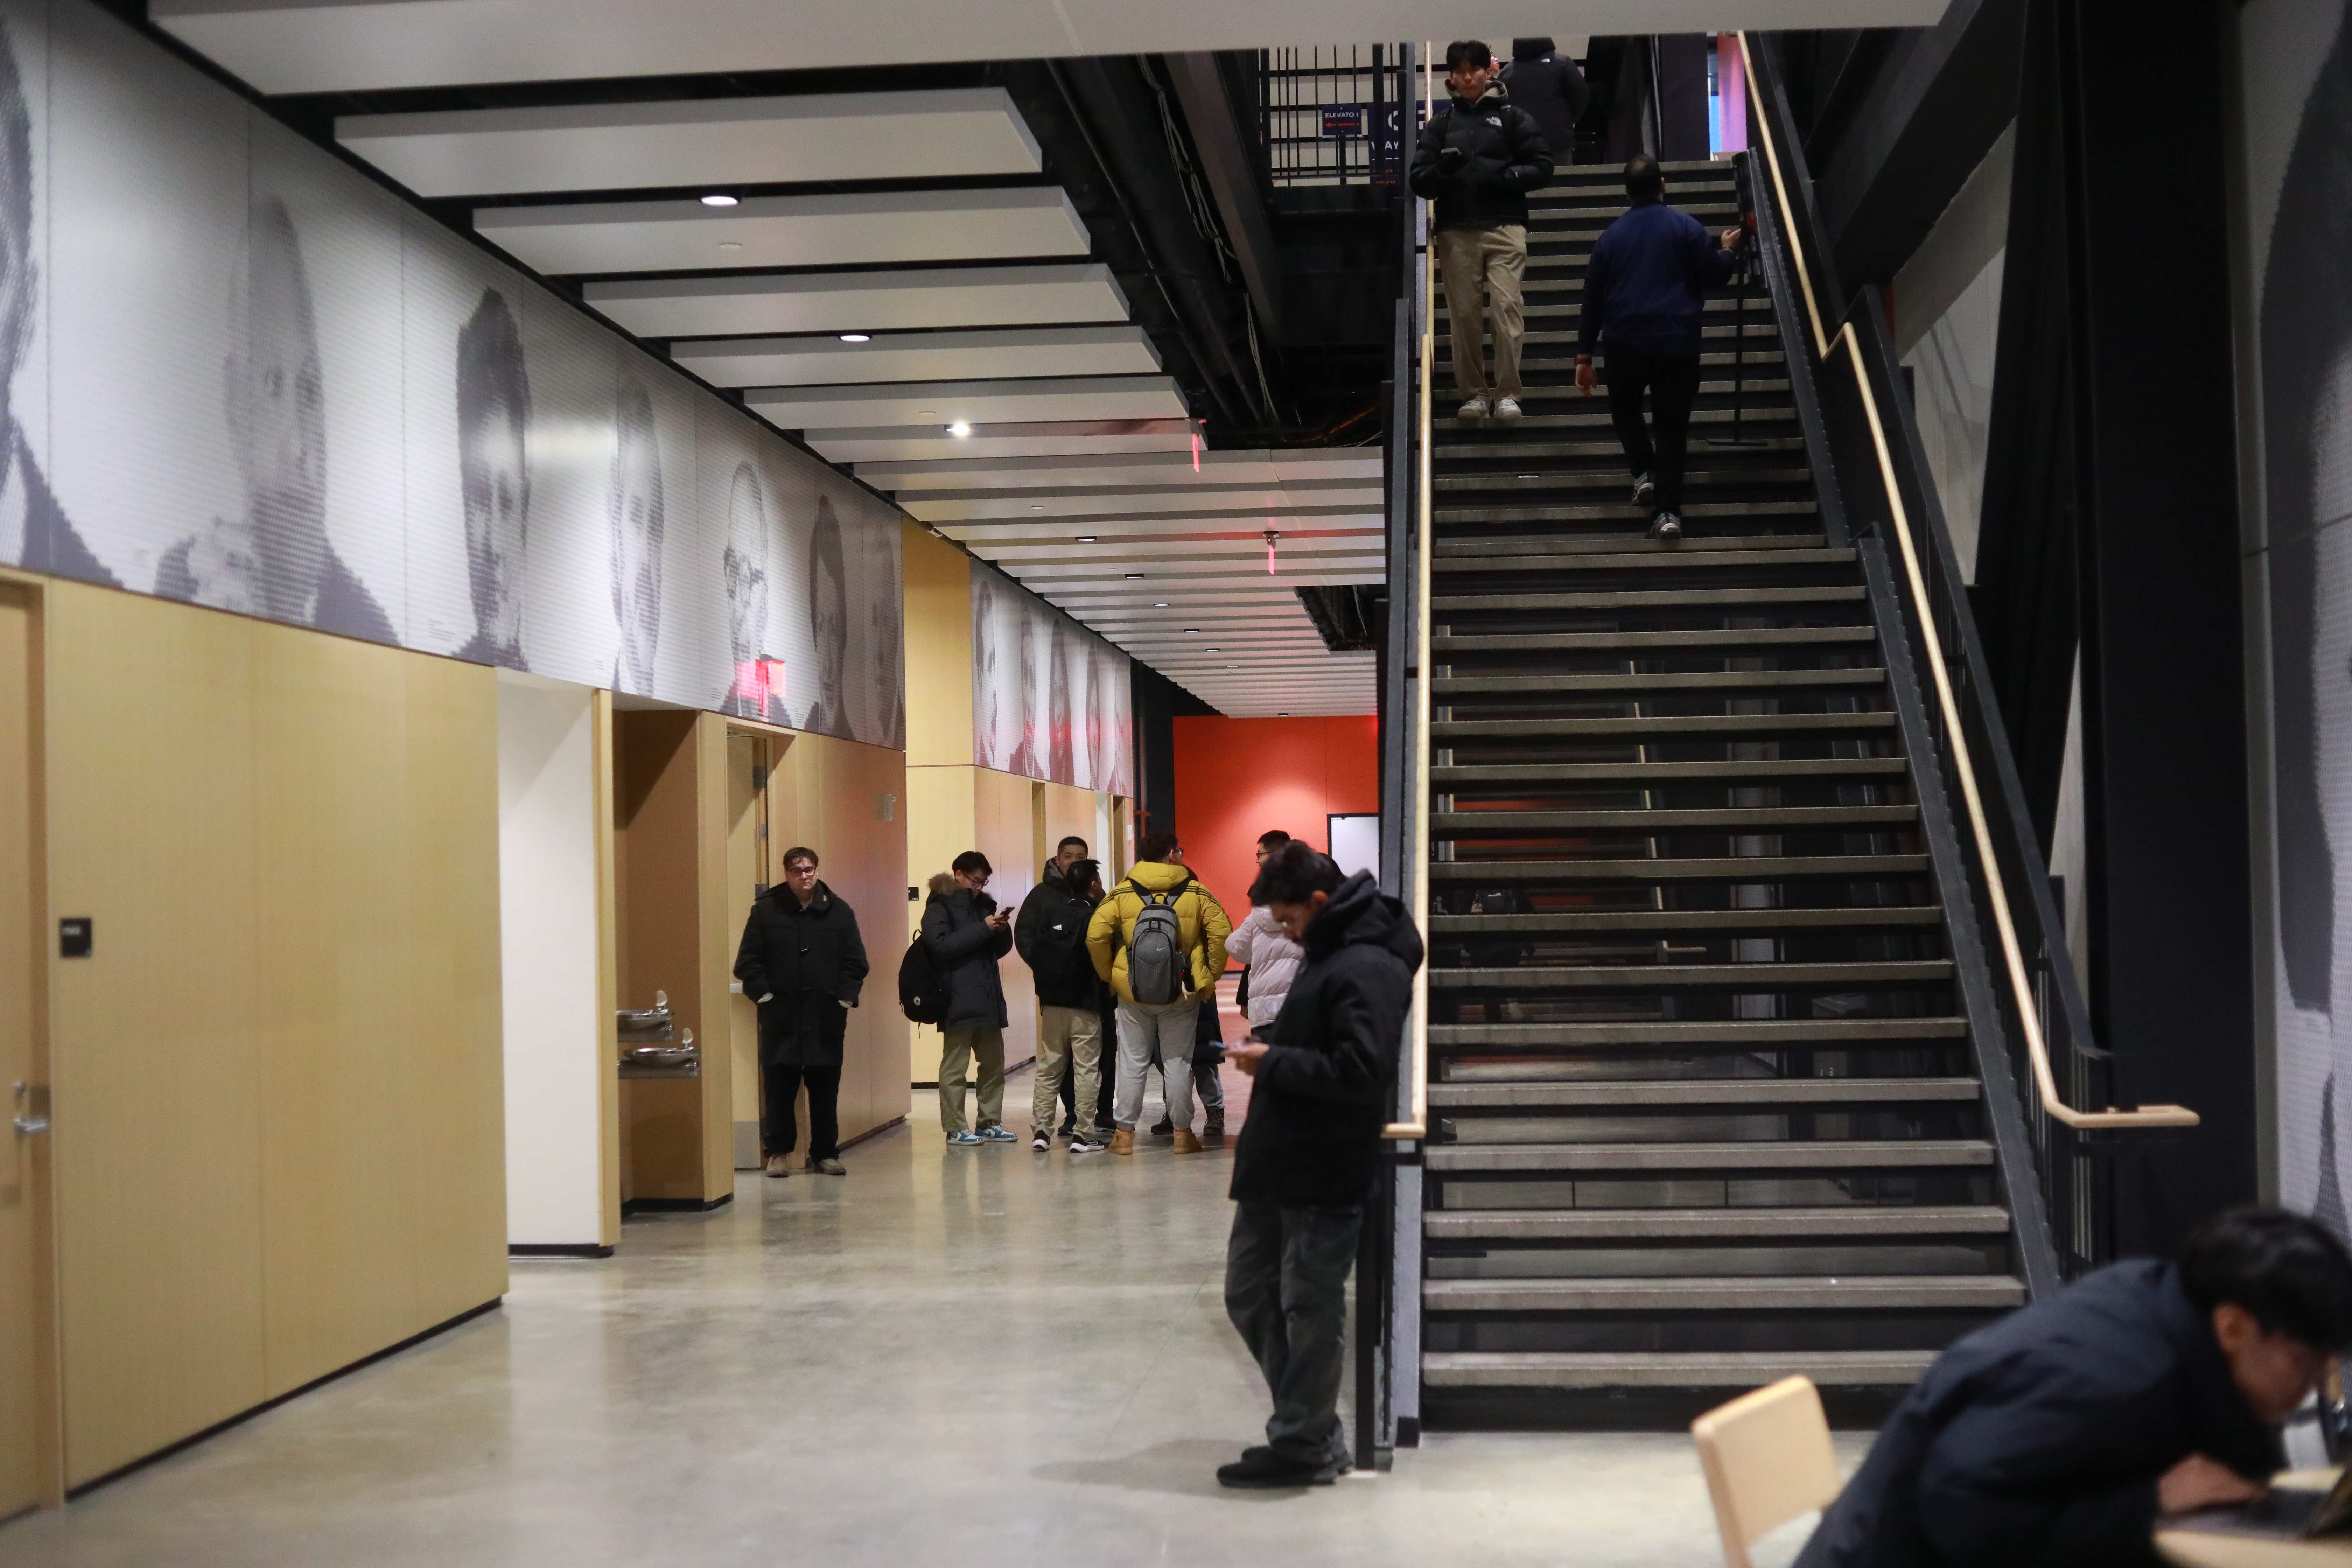 Modern hallway and stairwell with college students walking